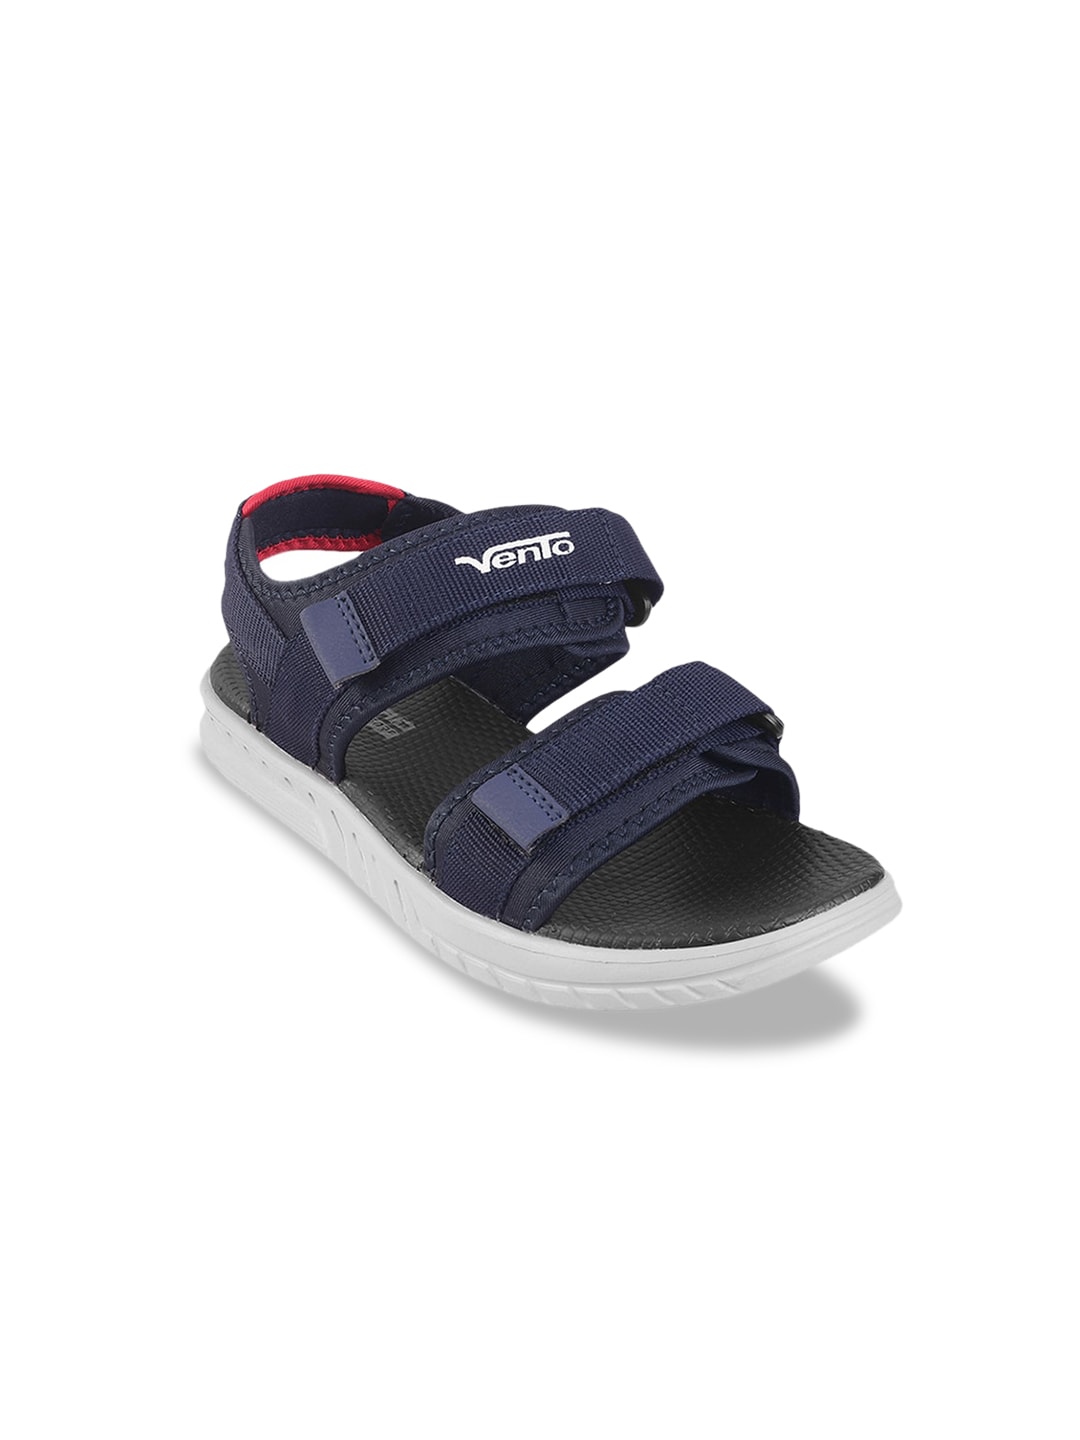 Vento Unisex Navy Blue & Red Solid Sports Sandals Price in India